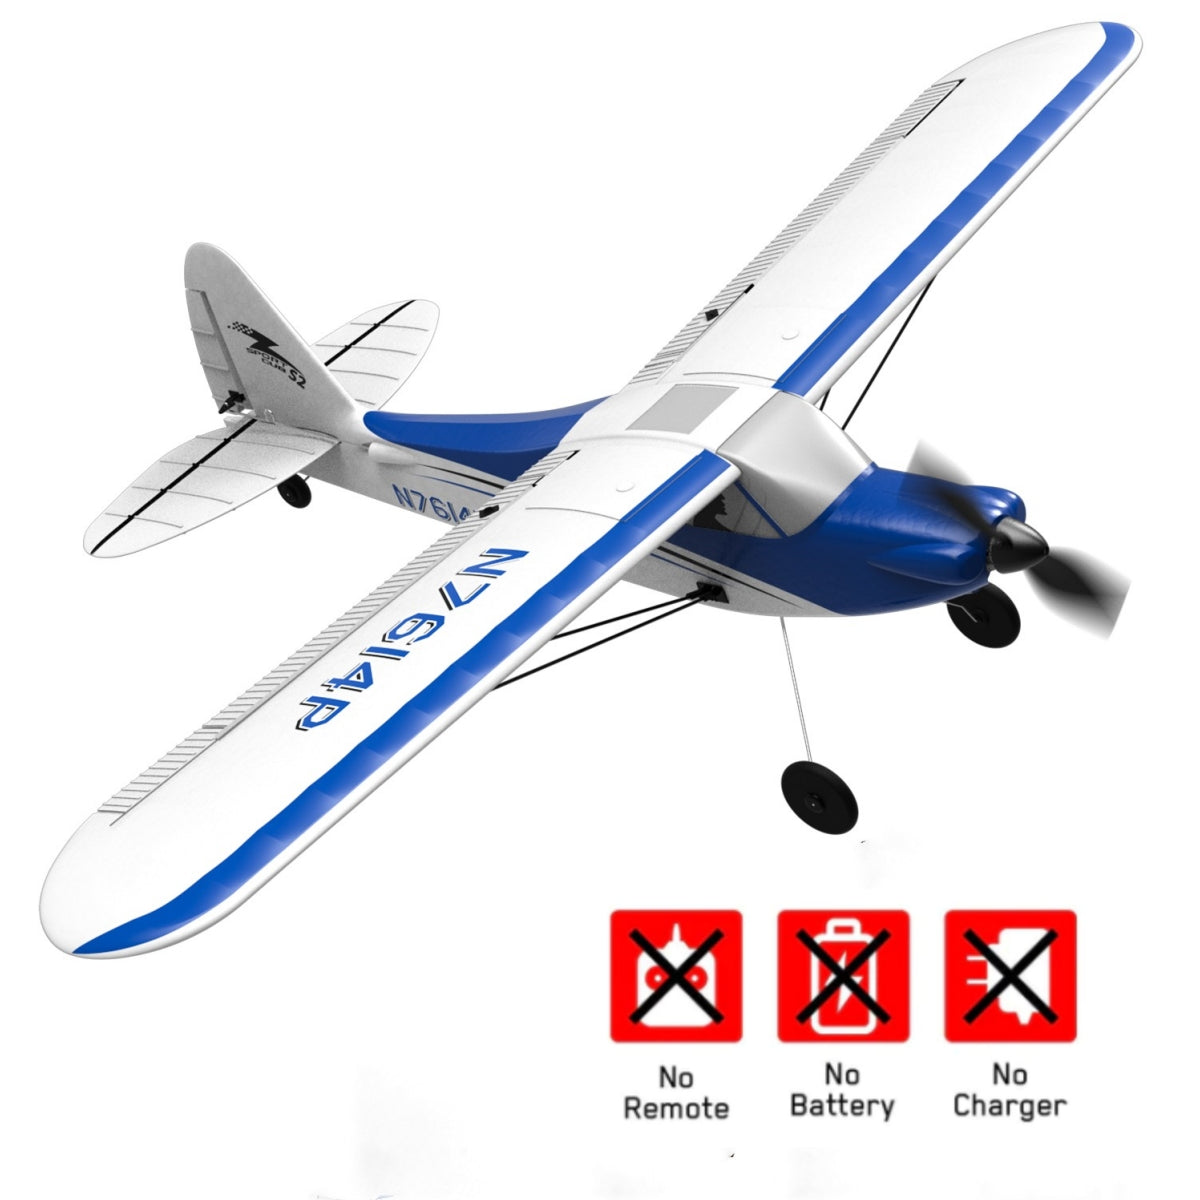 VOLANTEXRC Sport Cub 500 (76104) PNP without Radio, Battery & Charger-Blue